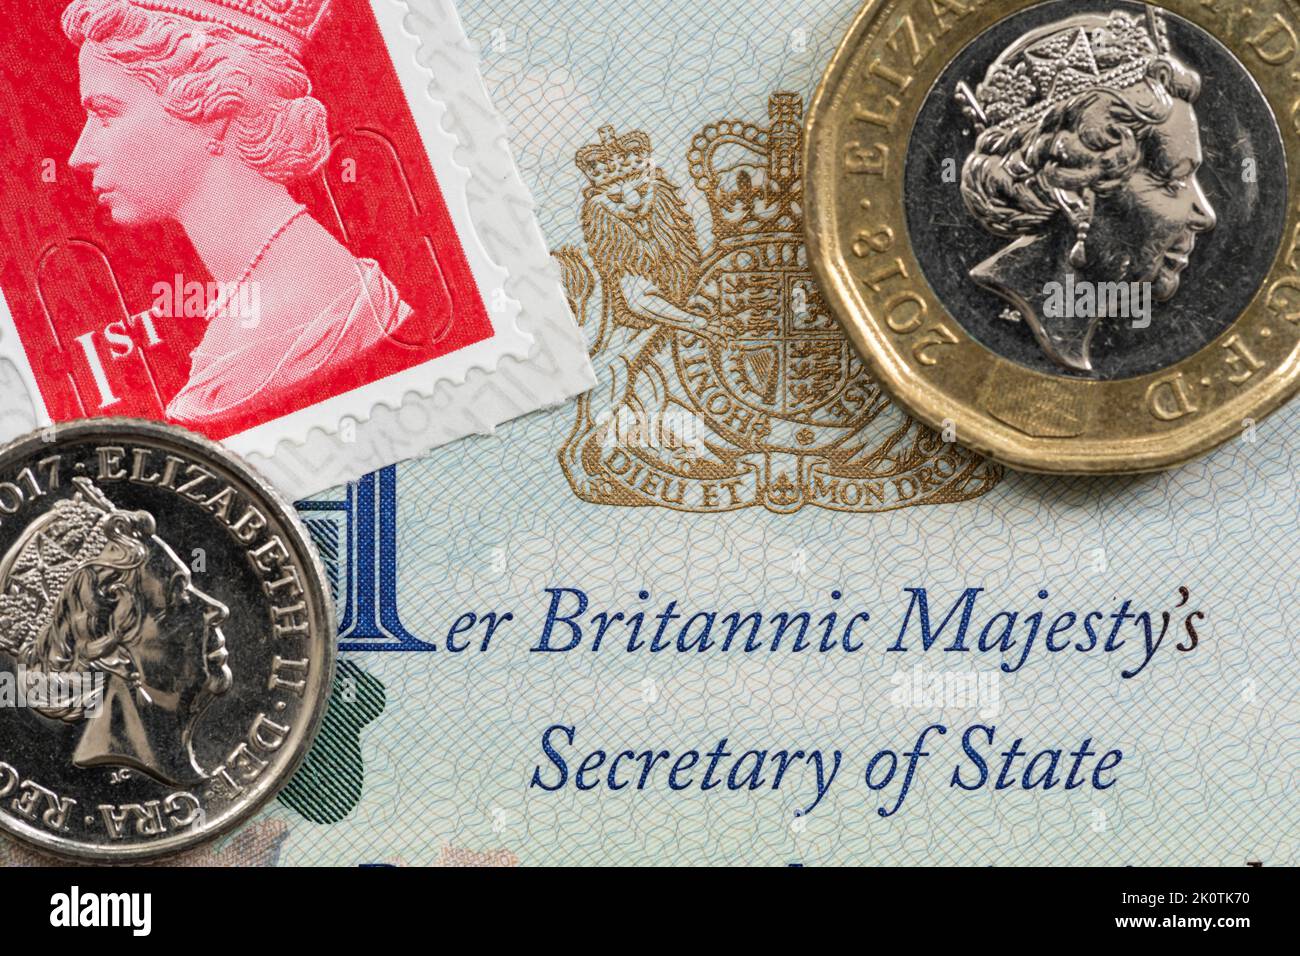 Unpicking the Queen Elizabeth II name and image from public life will take some time - passport page, stamps and coins bearing the queen's iconography Stock Photo